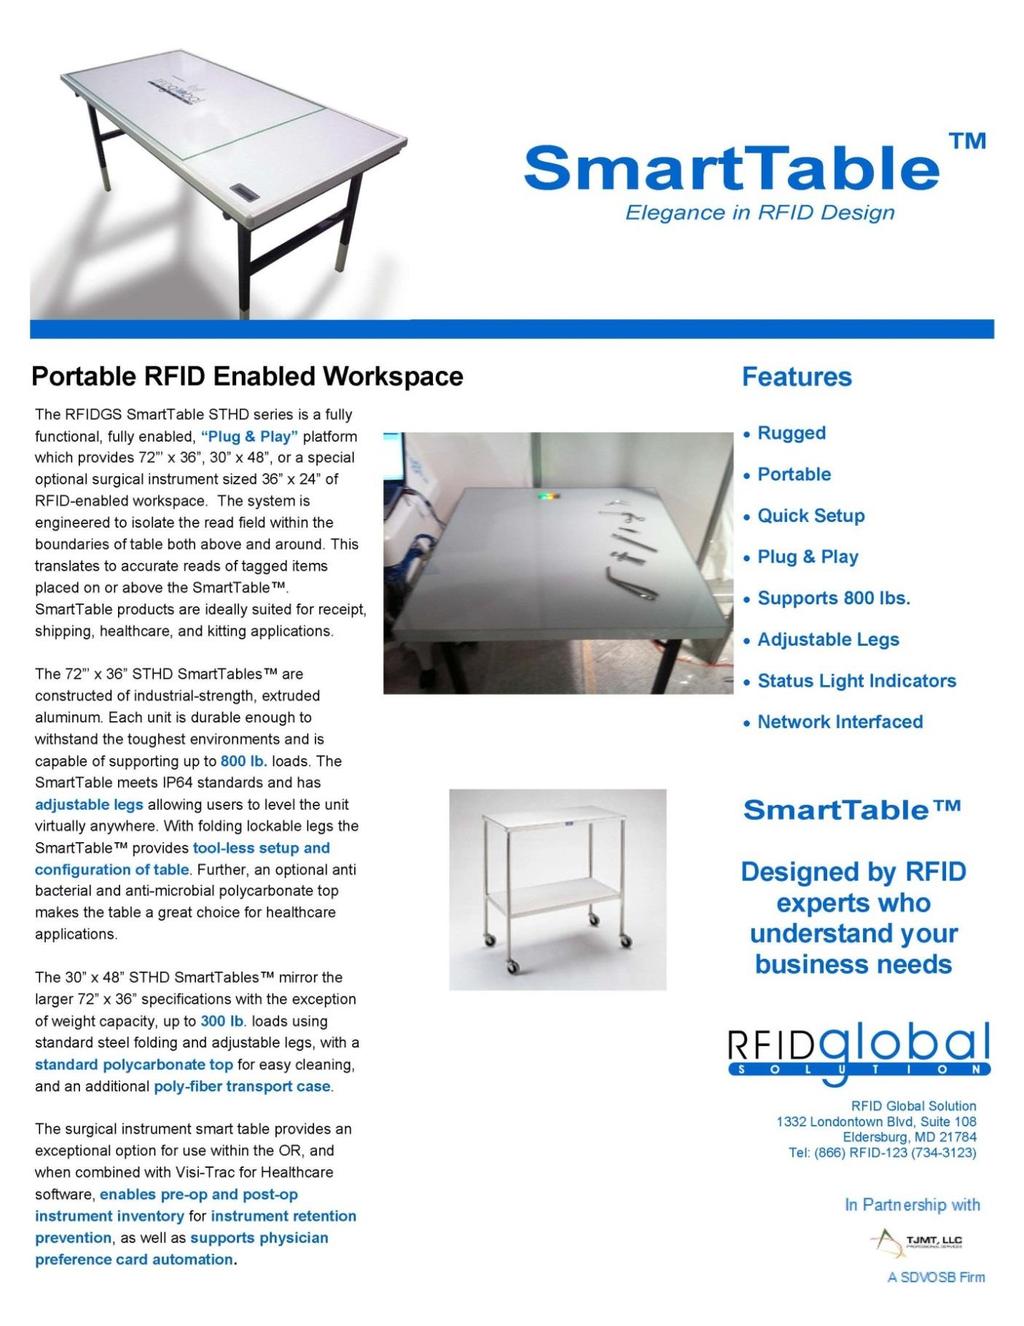 18. APPENDIX G: SLIN 0007 PRFID SMART TABLE Not all listed options are included in